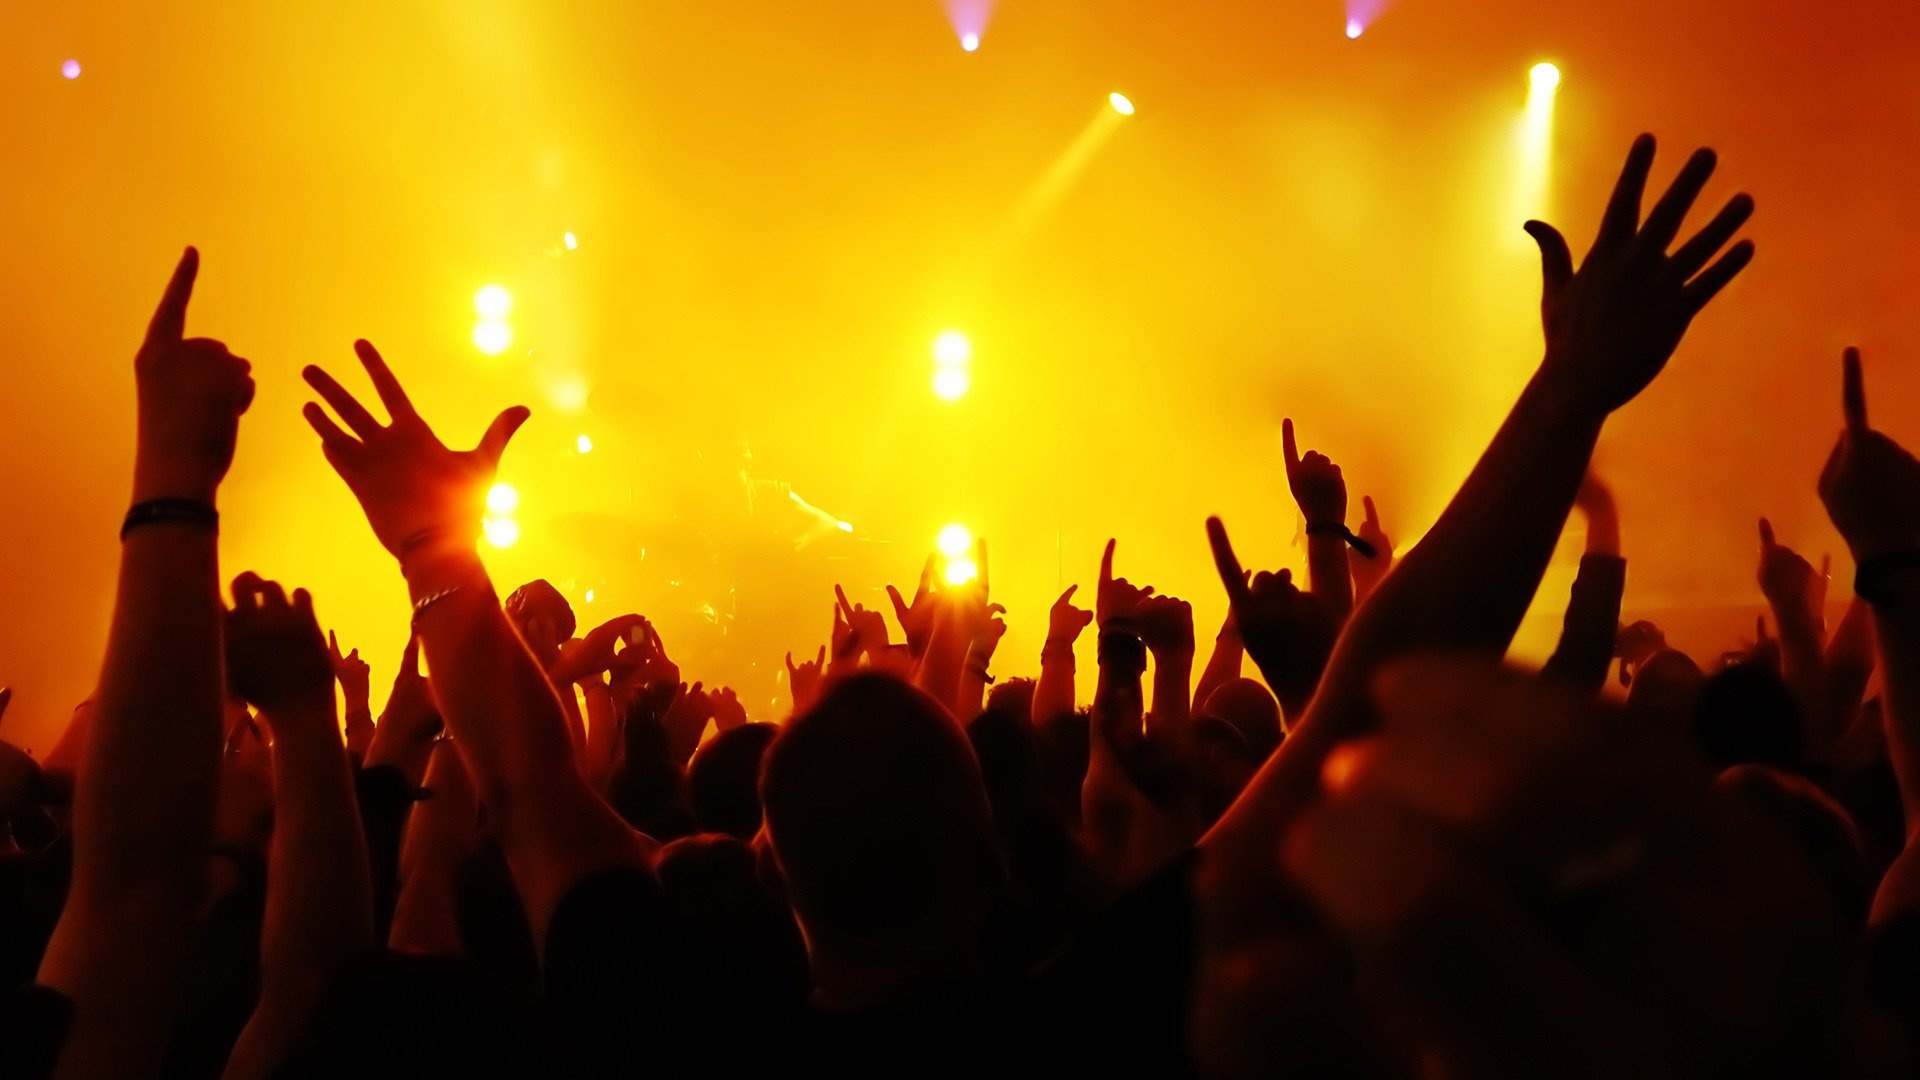 Concert: The highest attended events, Musical festival, Happy people waving hands. 1920x1080 Full HD Background.